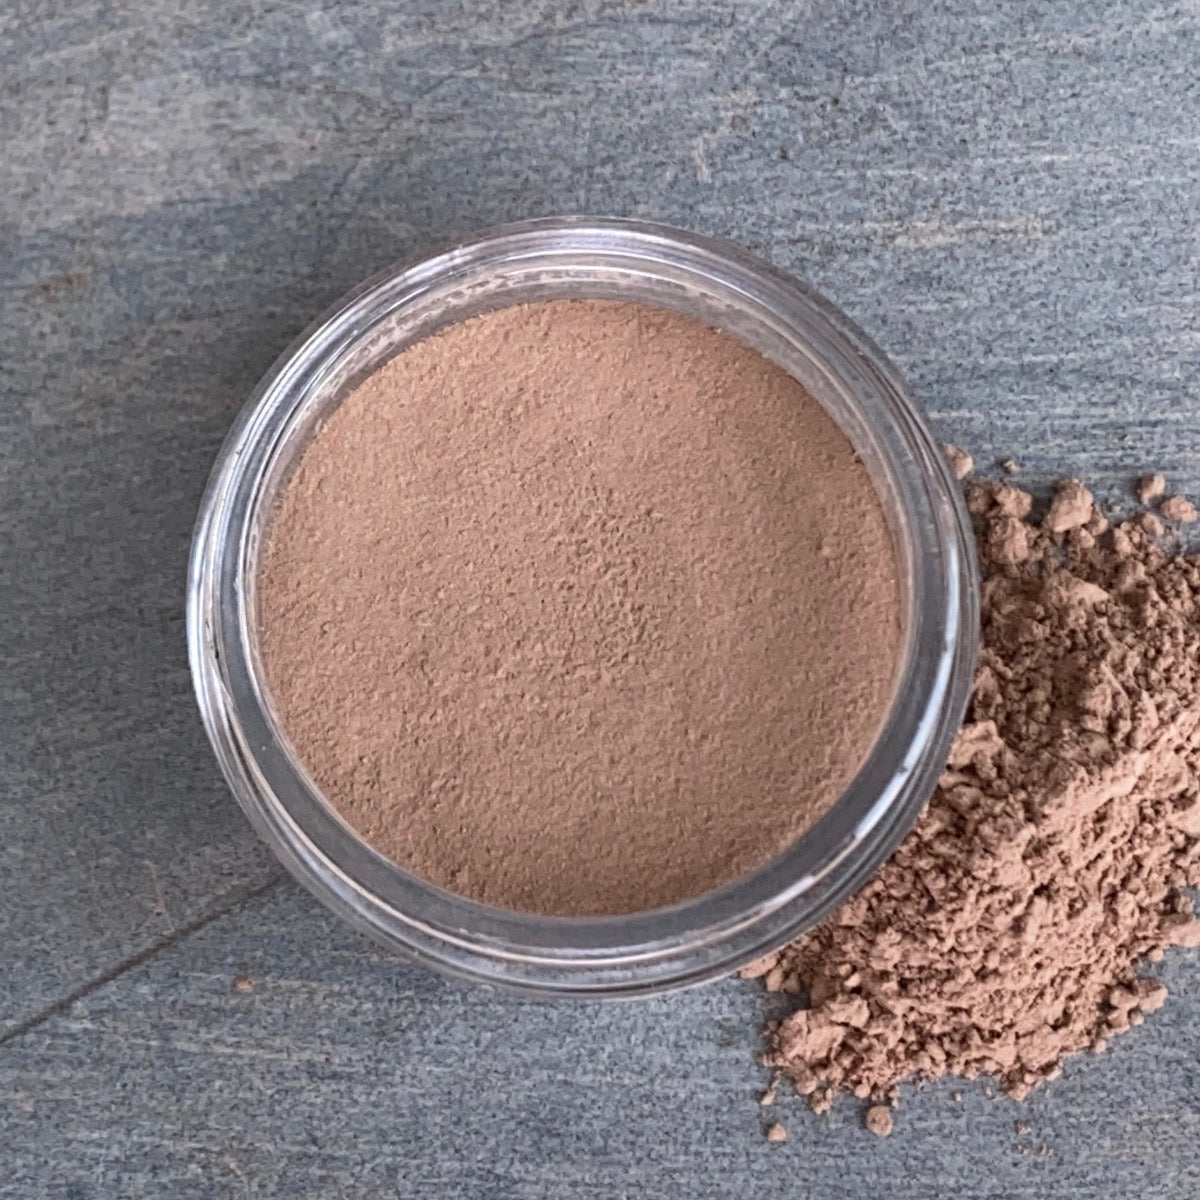 Cosmetic jar of cocoa-hued blush loose powder bronzer displaying its color and texture